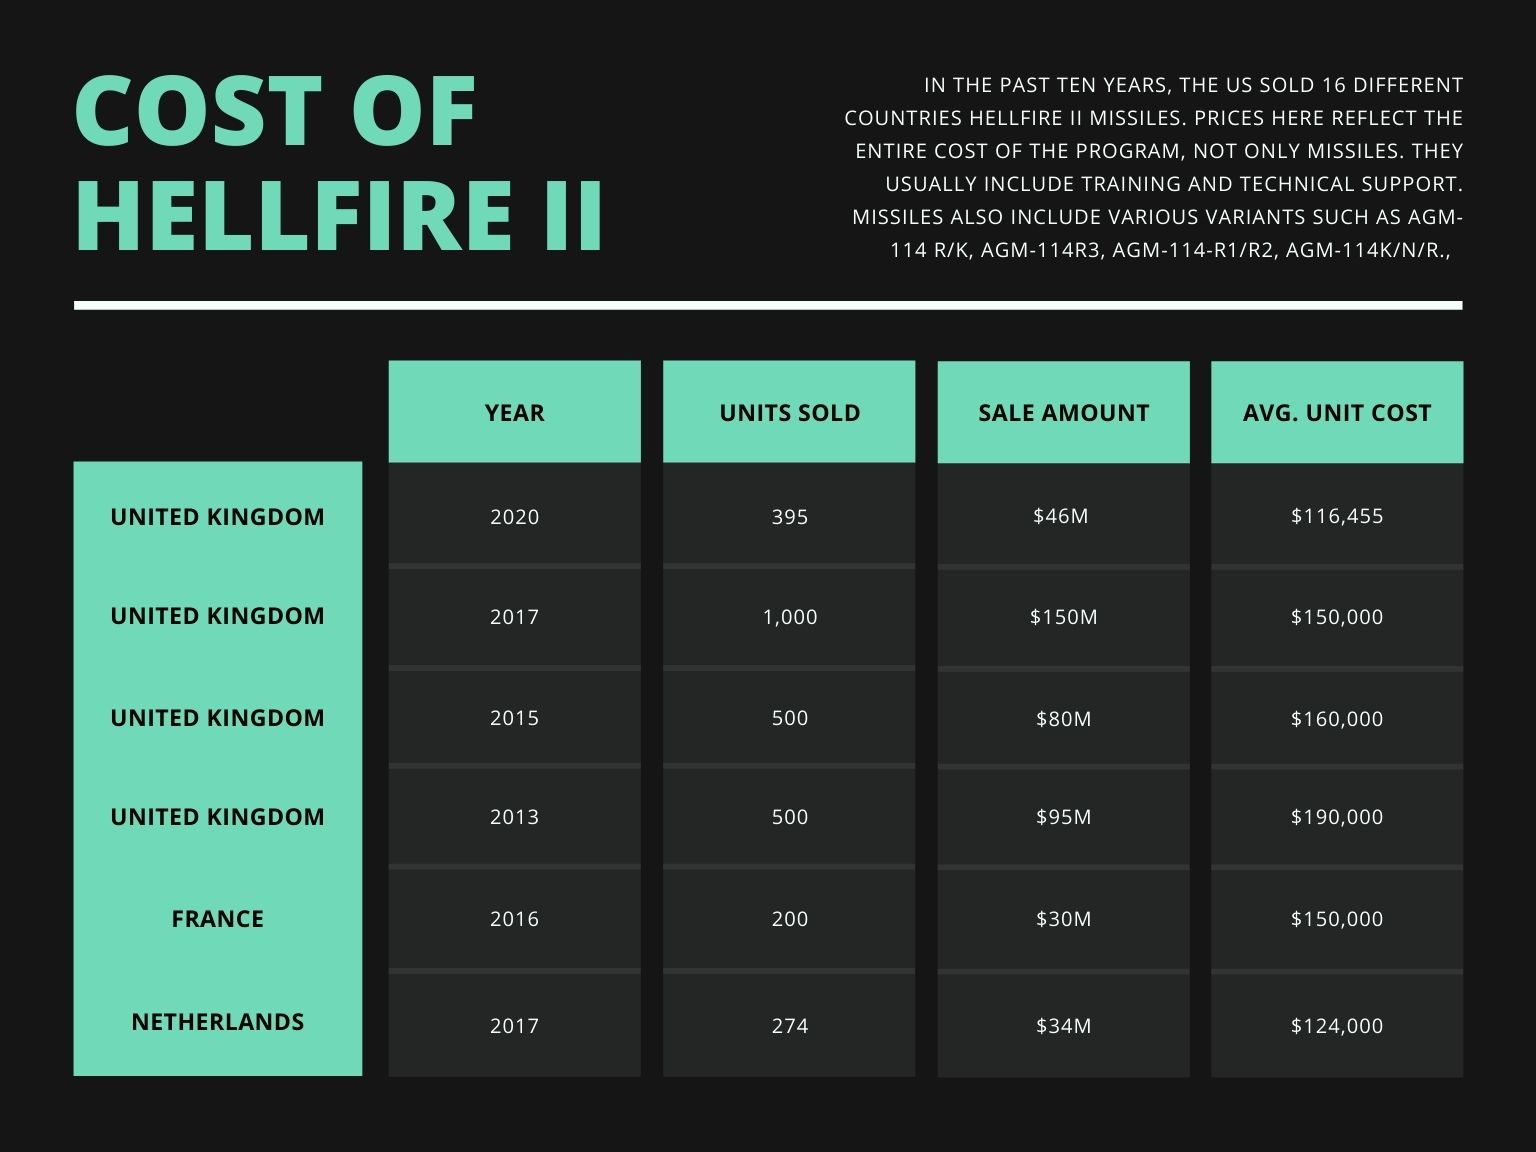 chart showing cost of hellfire II missiles in UK, France, Netherlands over years